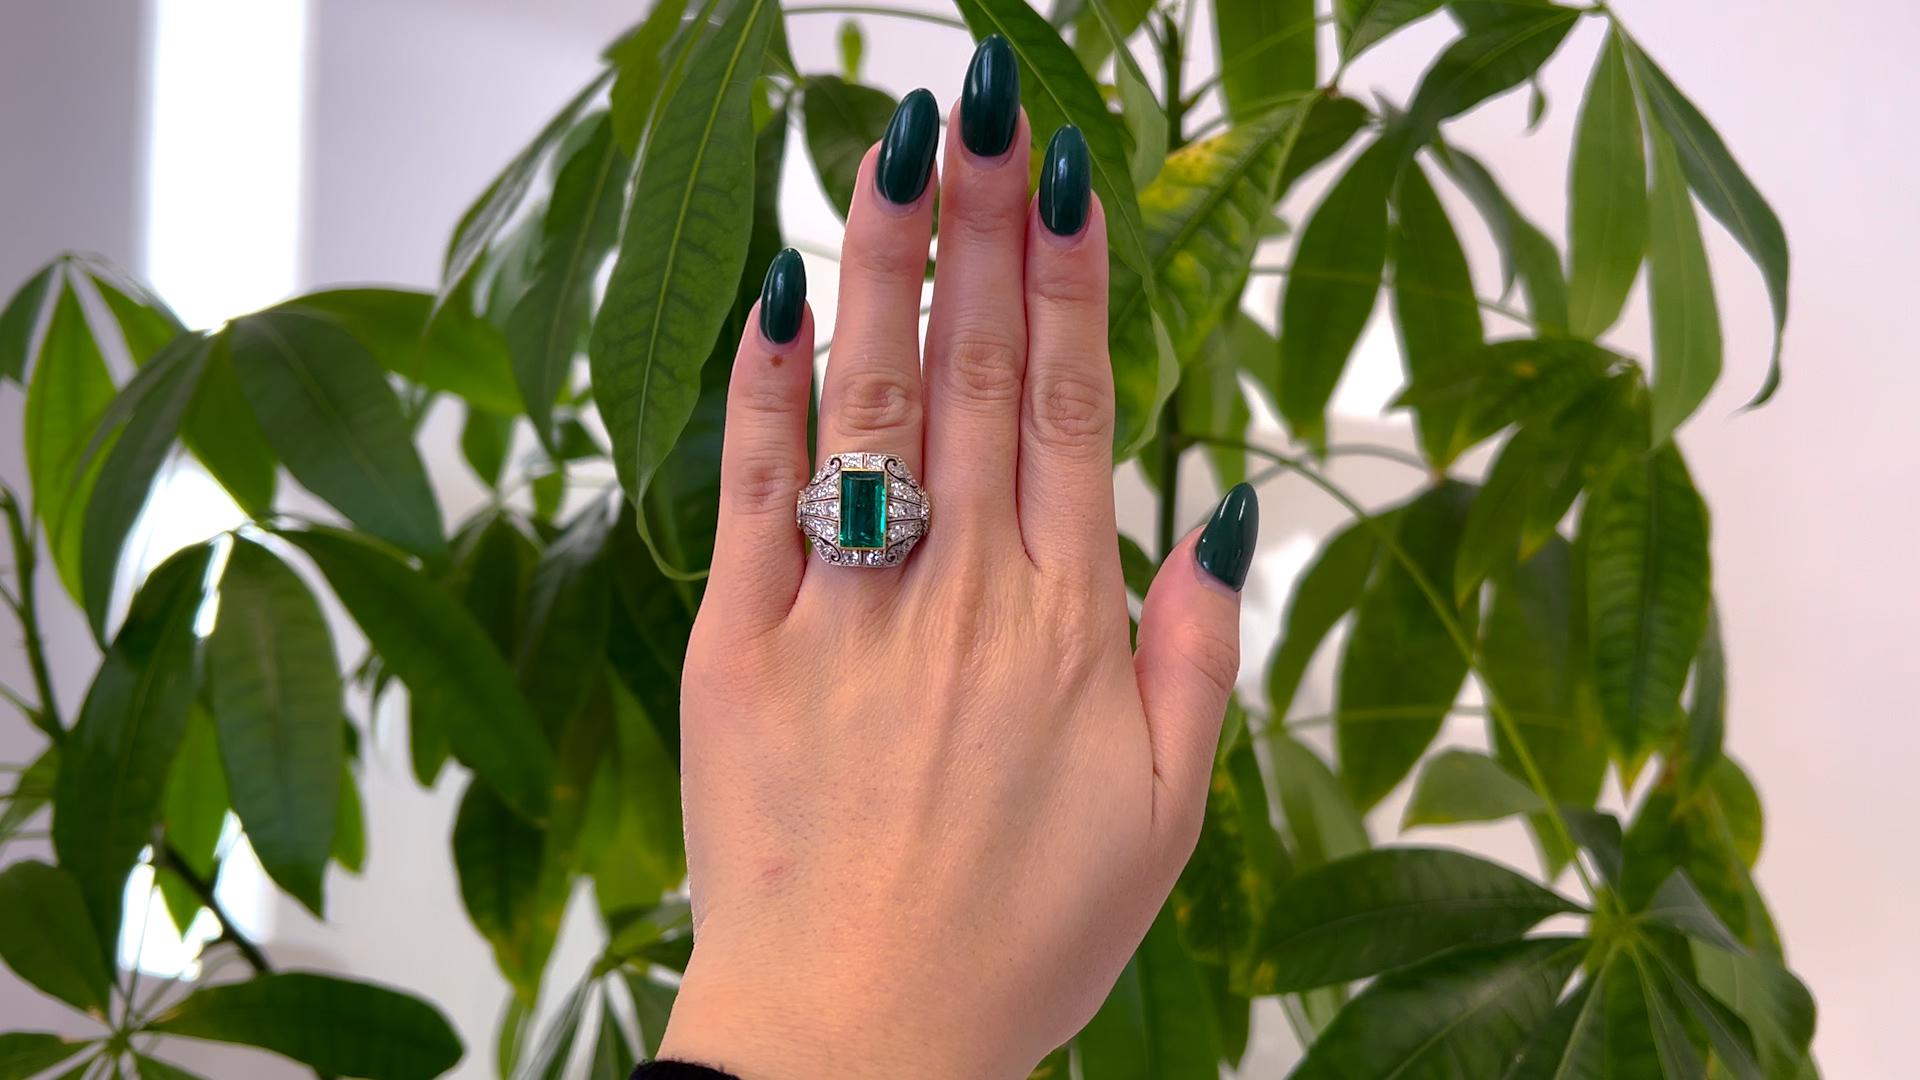 One Art Deco Inspired AGL Colombian Minor Oil Emerald Diamond Platinum Ring. Featuring one AGL rectangular step cut emerald of 2.98 carats, accompanied with AGL #1101095 stating the emerald is of Colombian origin with minor oil. Accented by 52 old